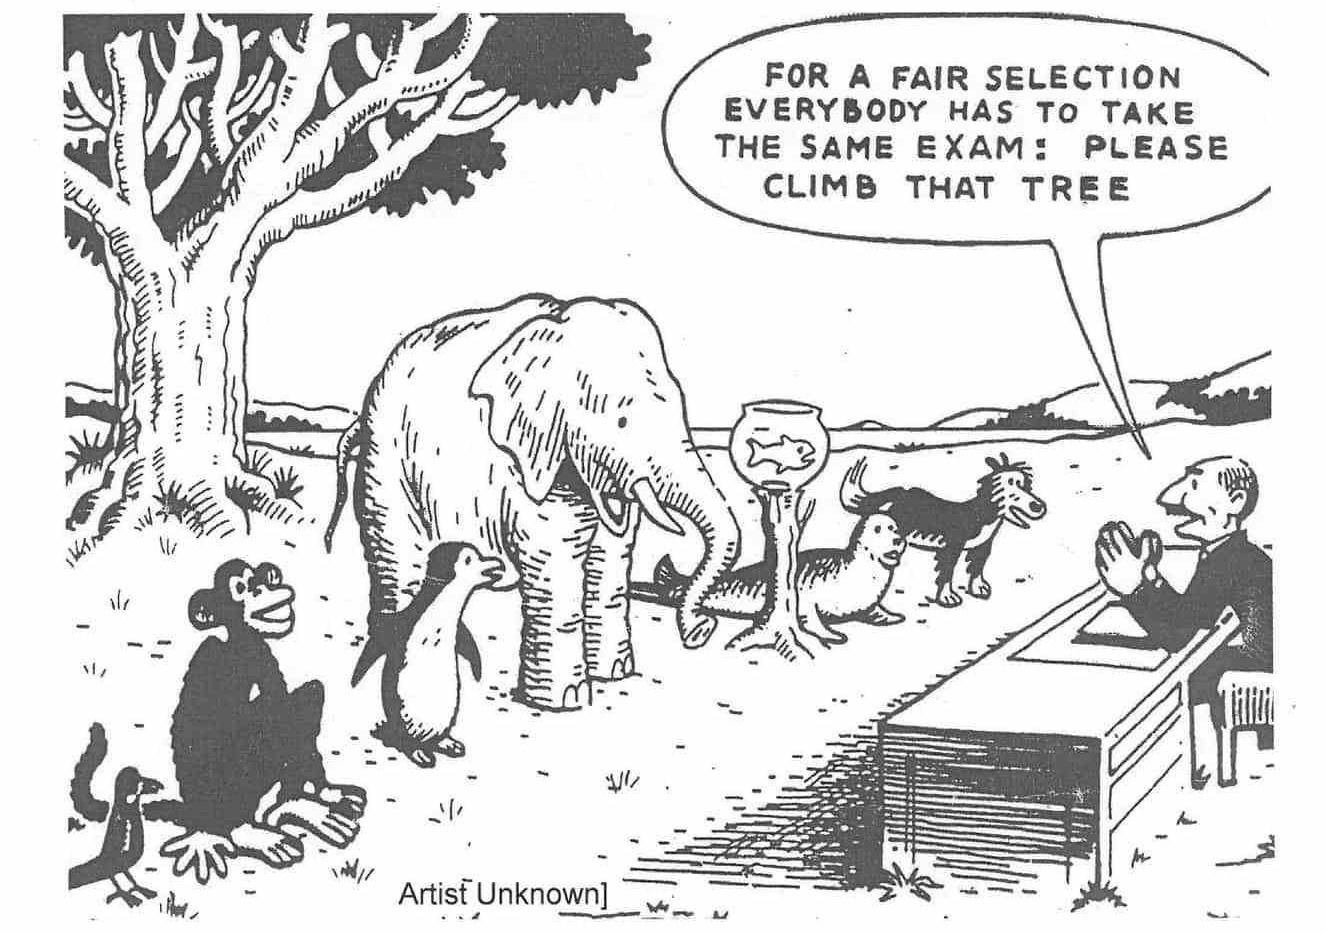 Understanding test results and data schools share.